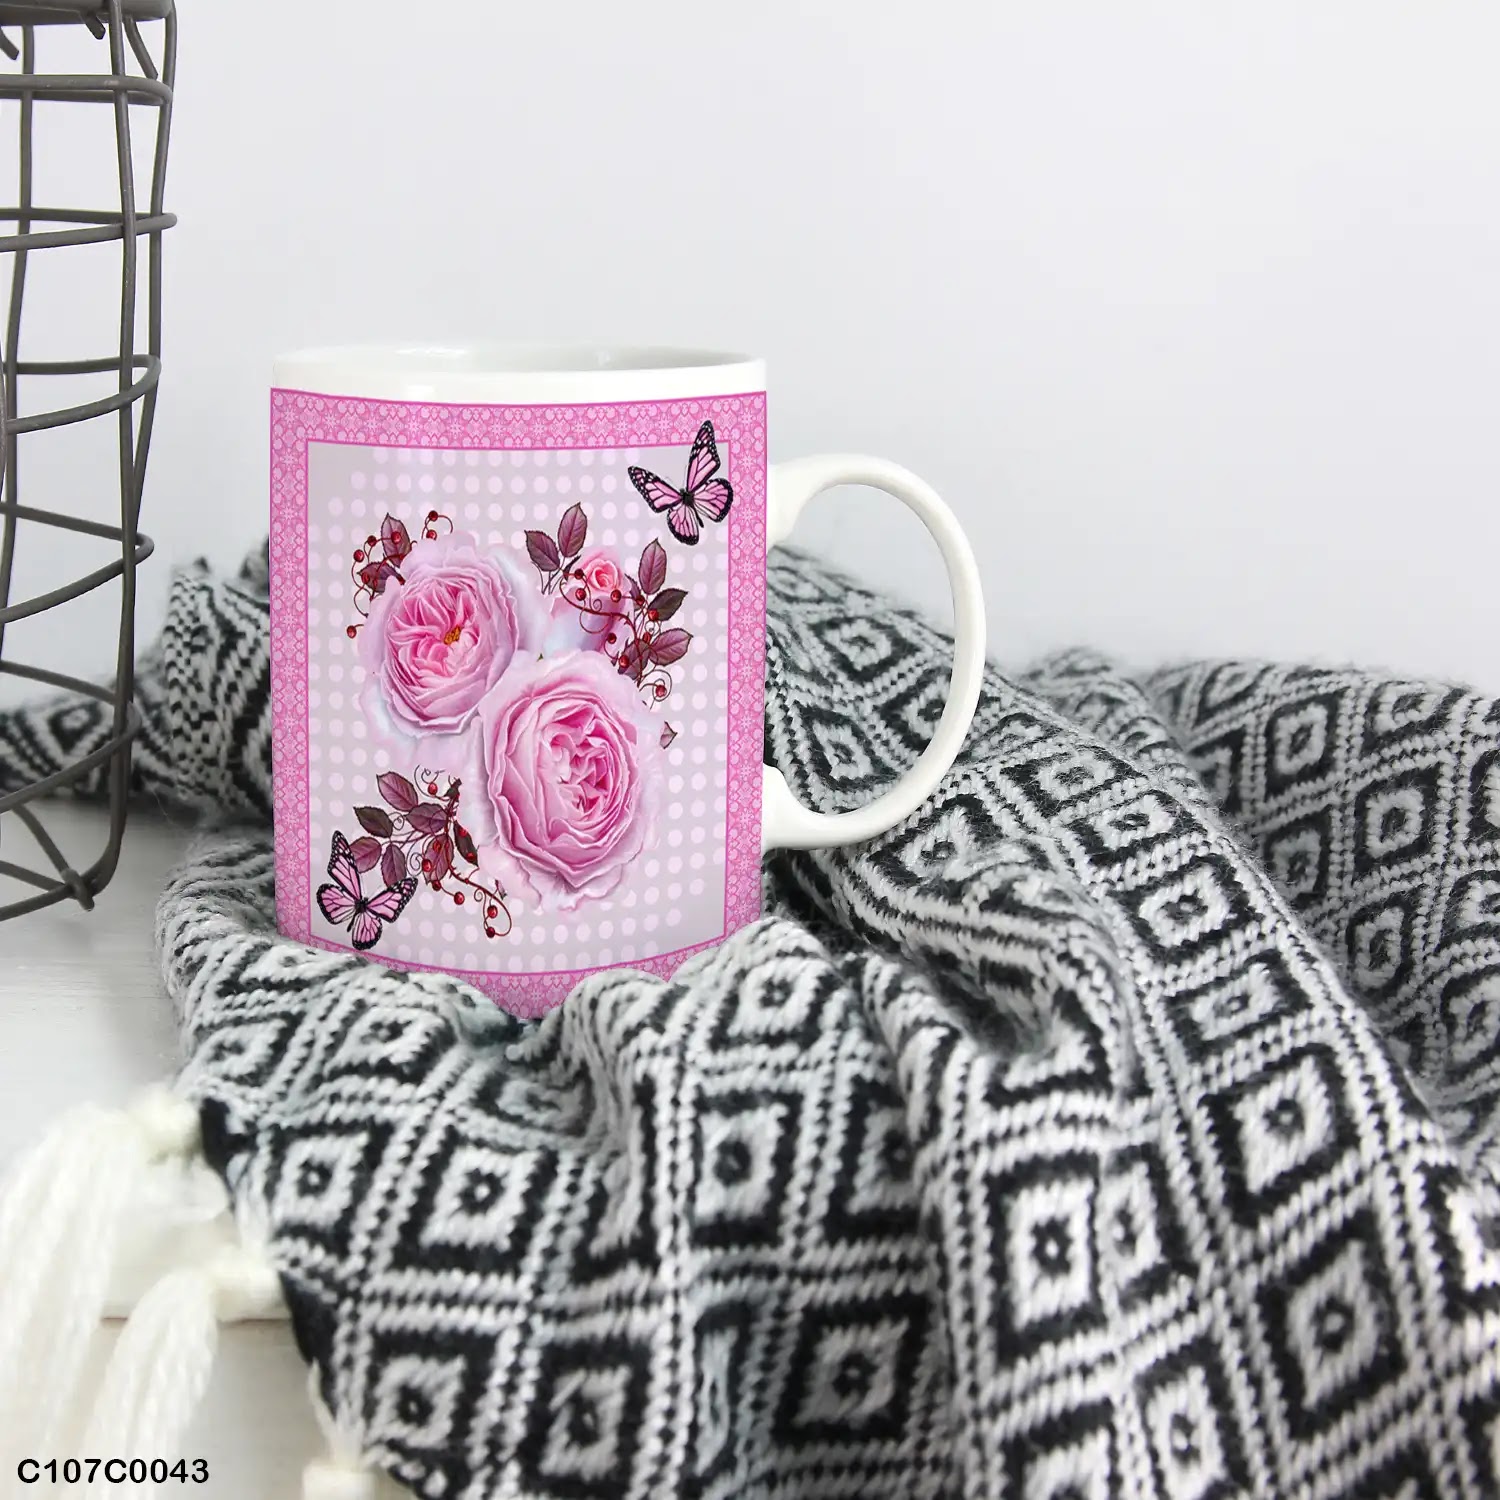 A pink mug (cup) printed with an image of pink flowers and butterflies